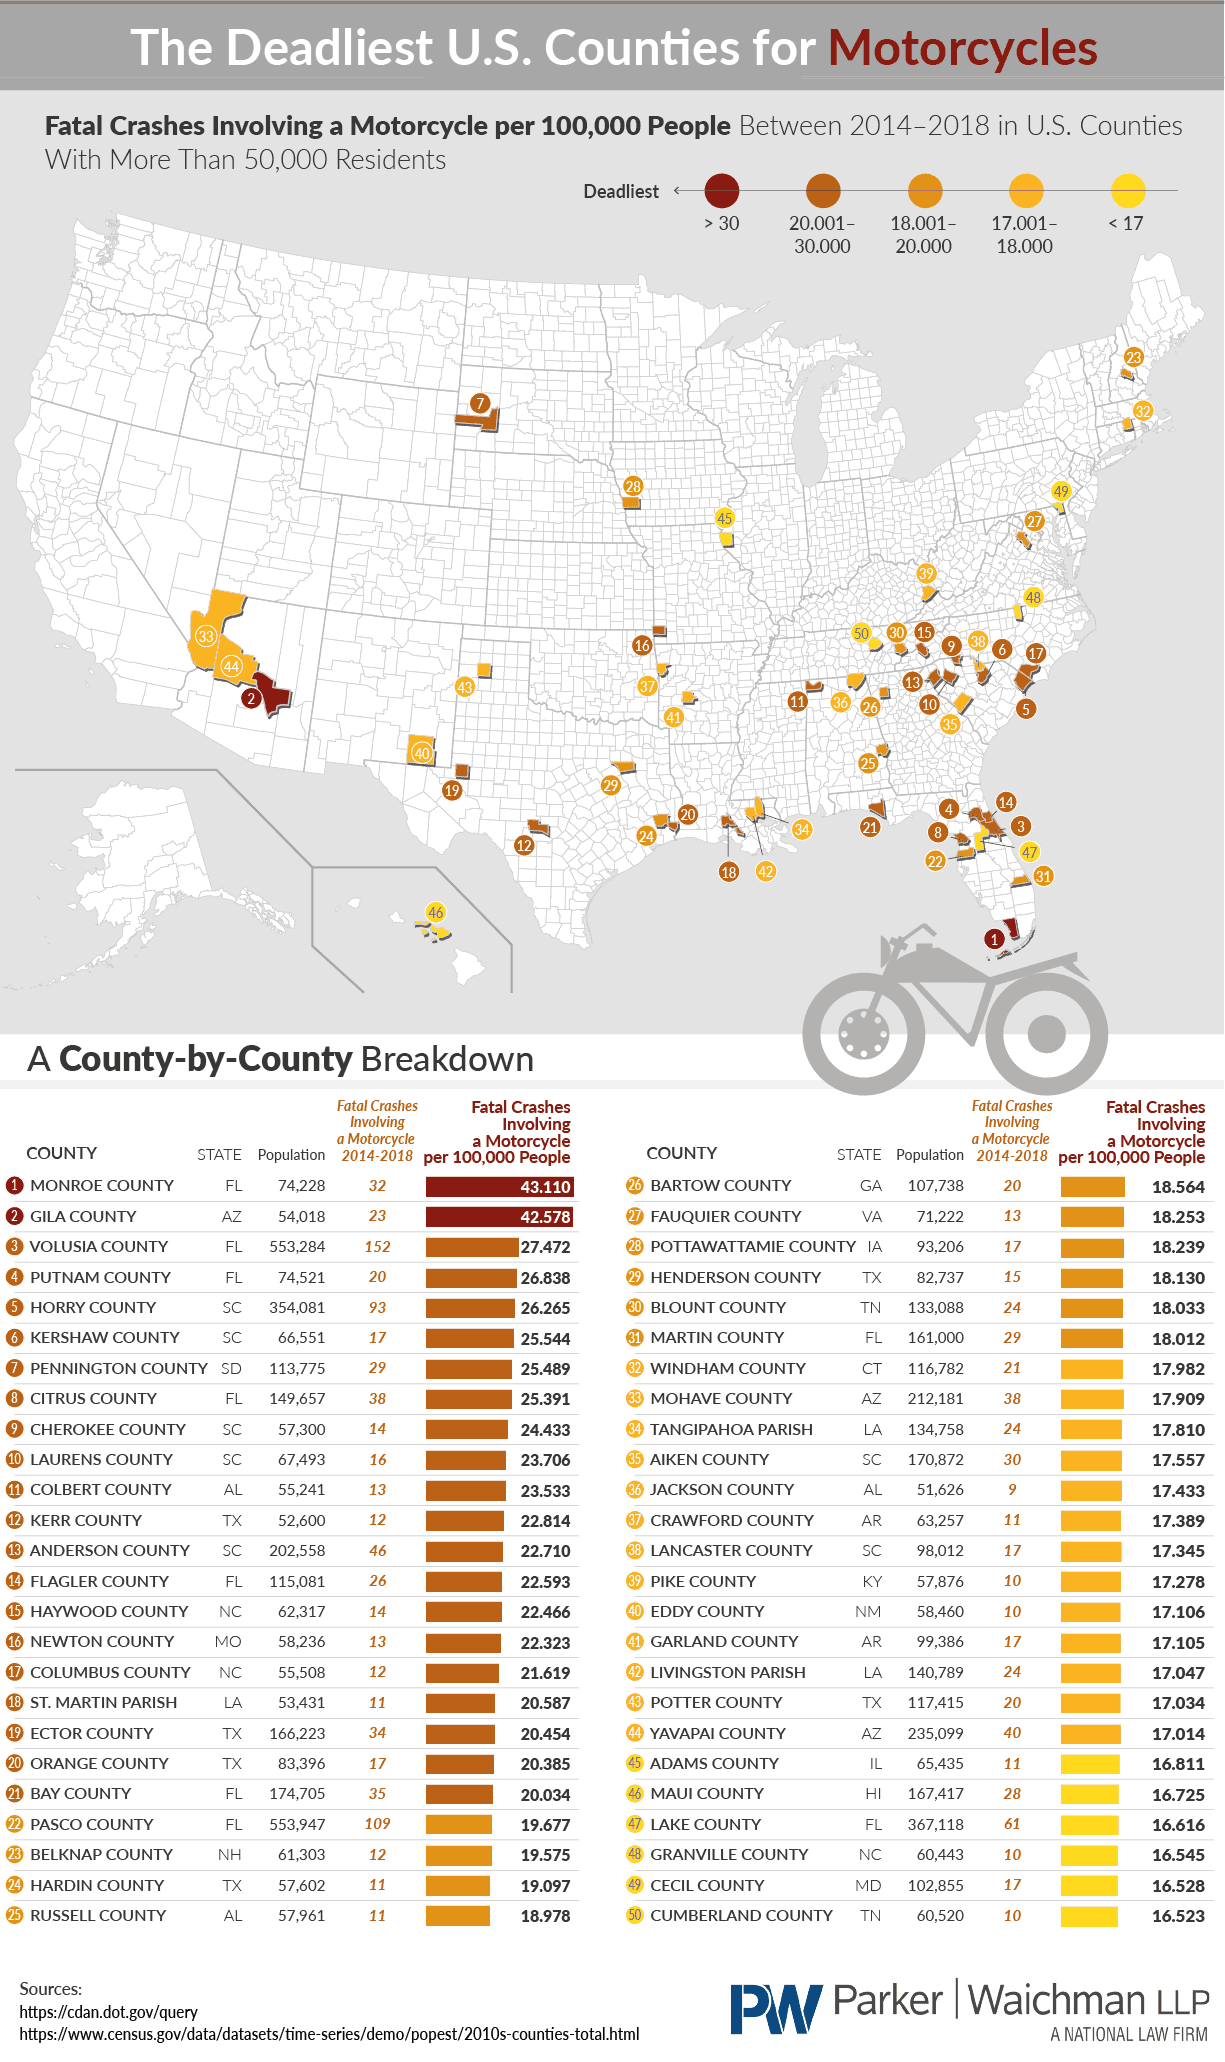 Deadliest Counties for Motorcycles